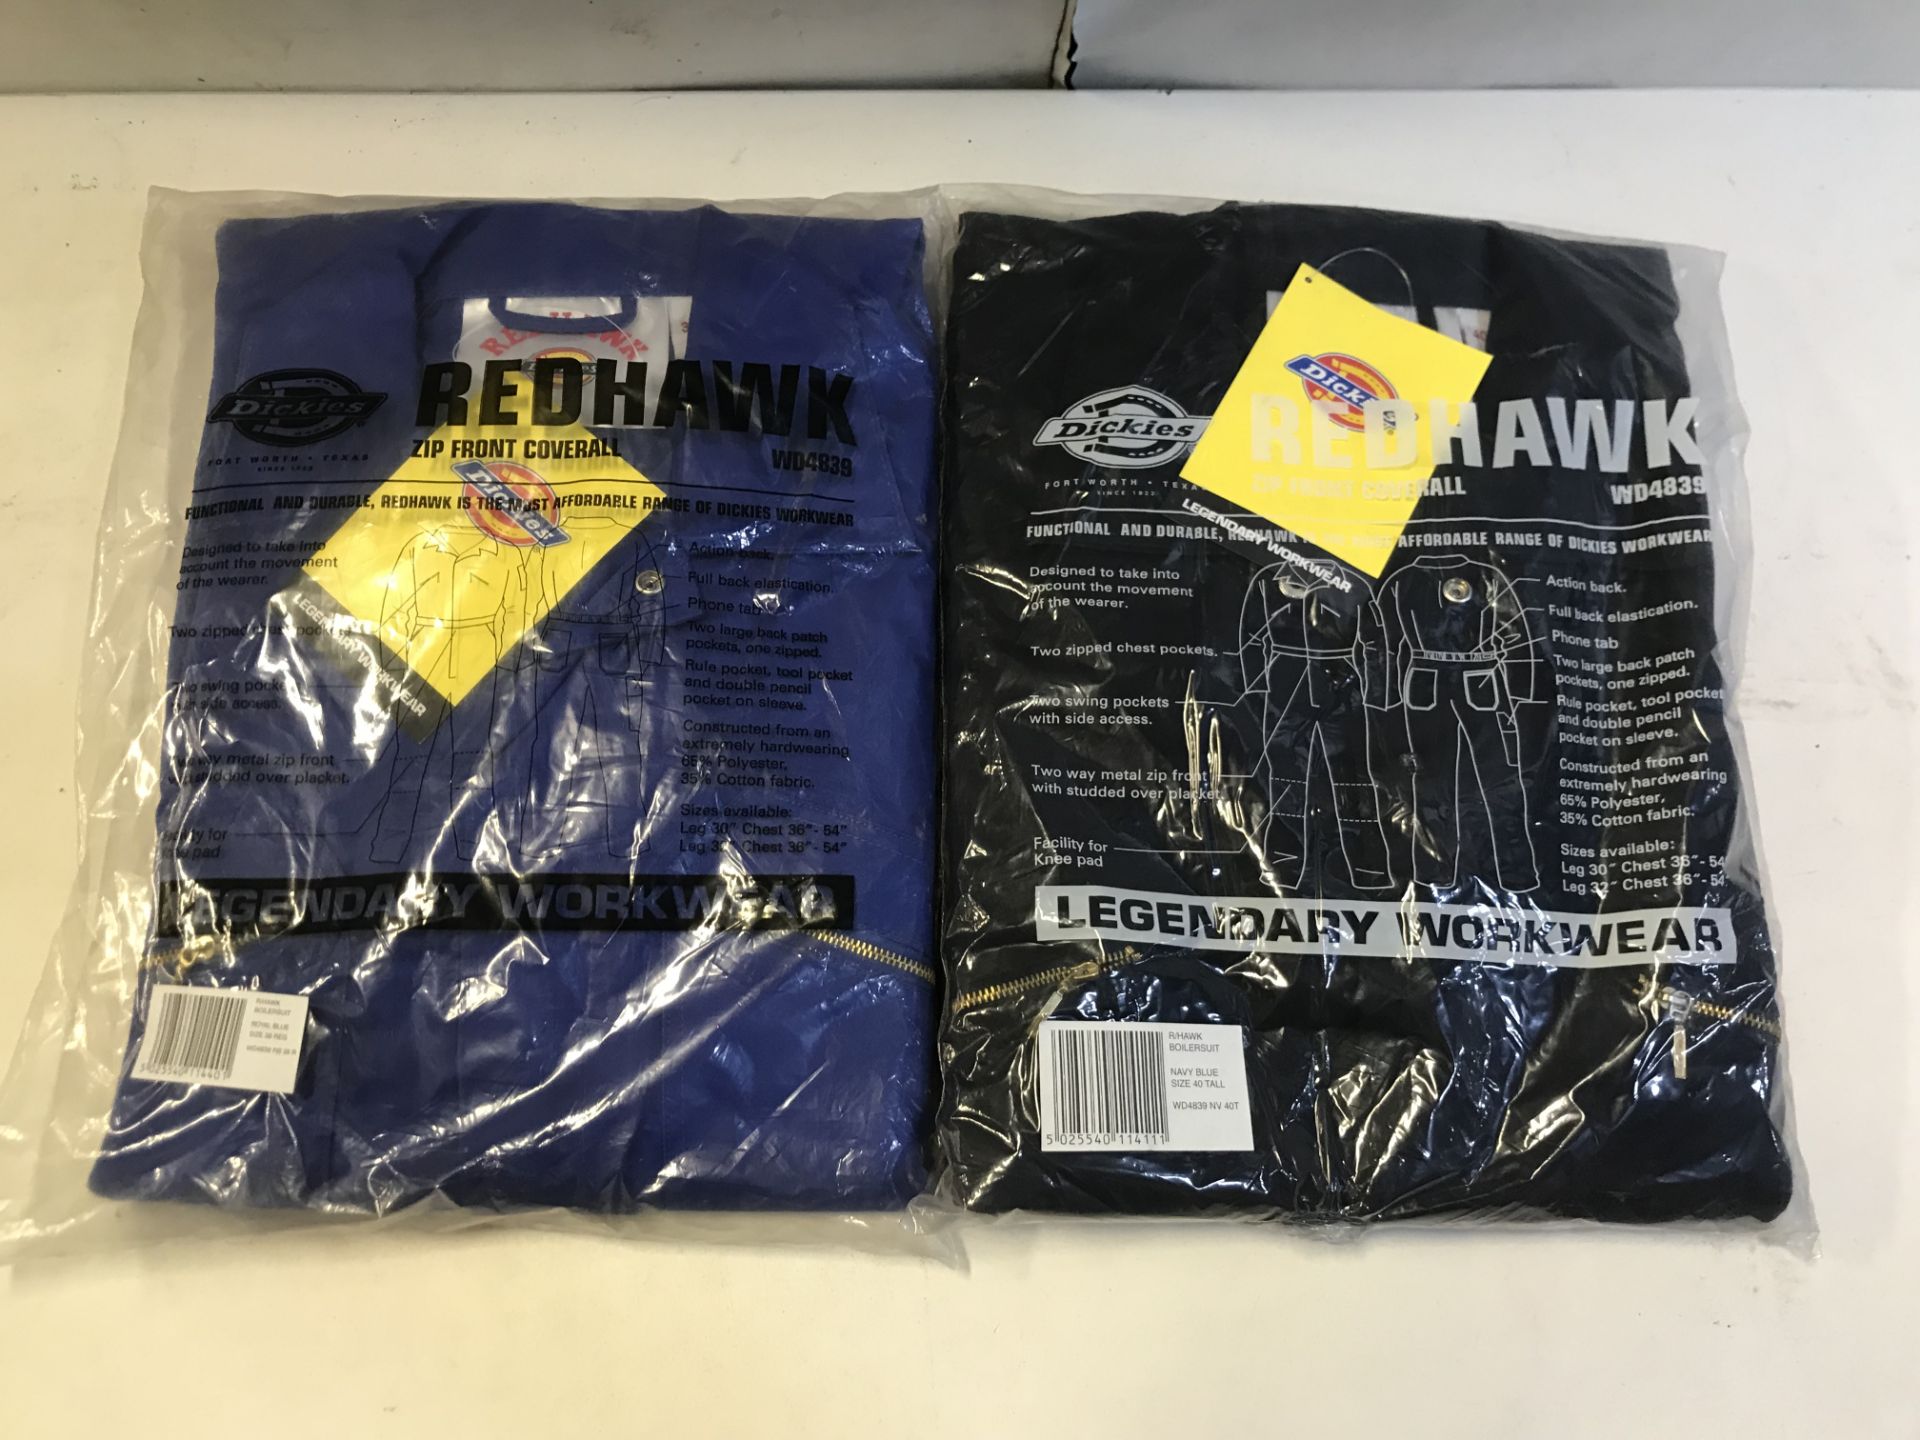 45 x Dickies Redhawk Boiler suits/Coveralls - Navy & Royal Blue - Various Sizes